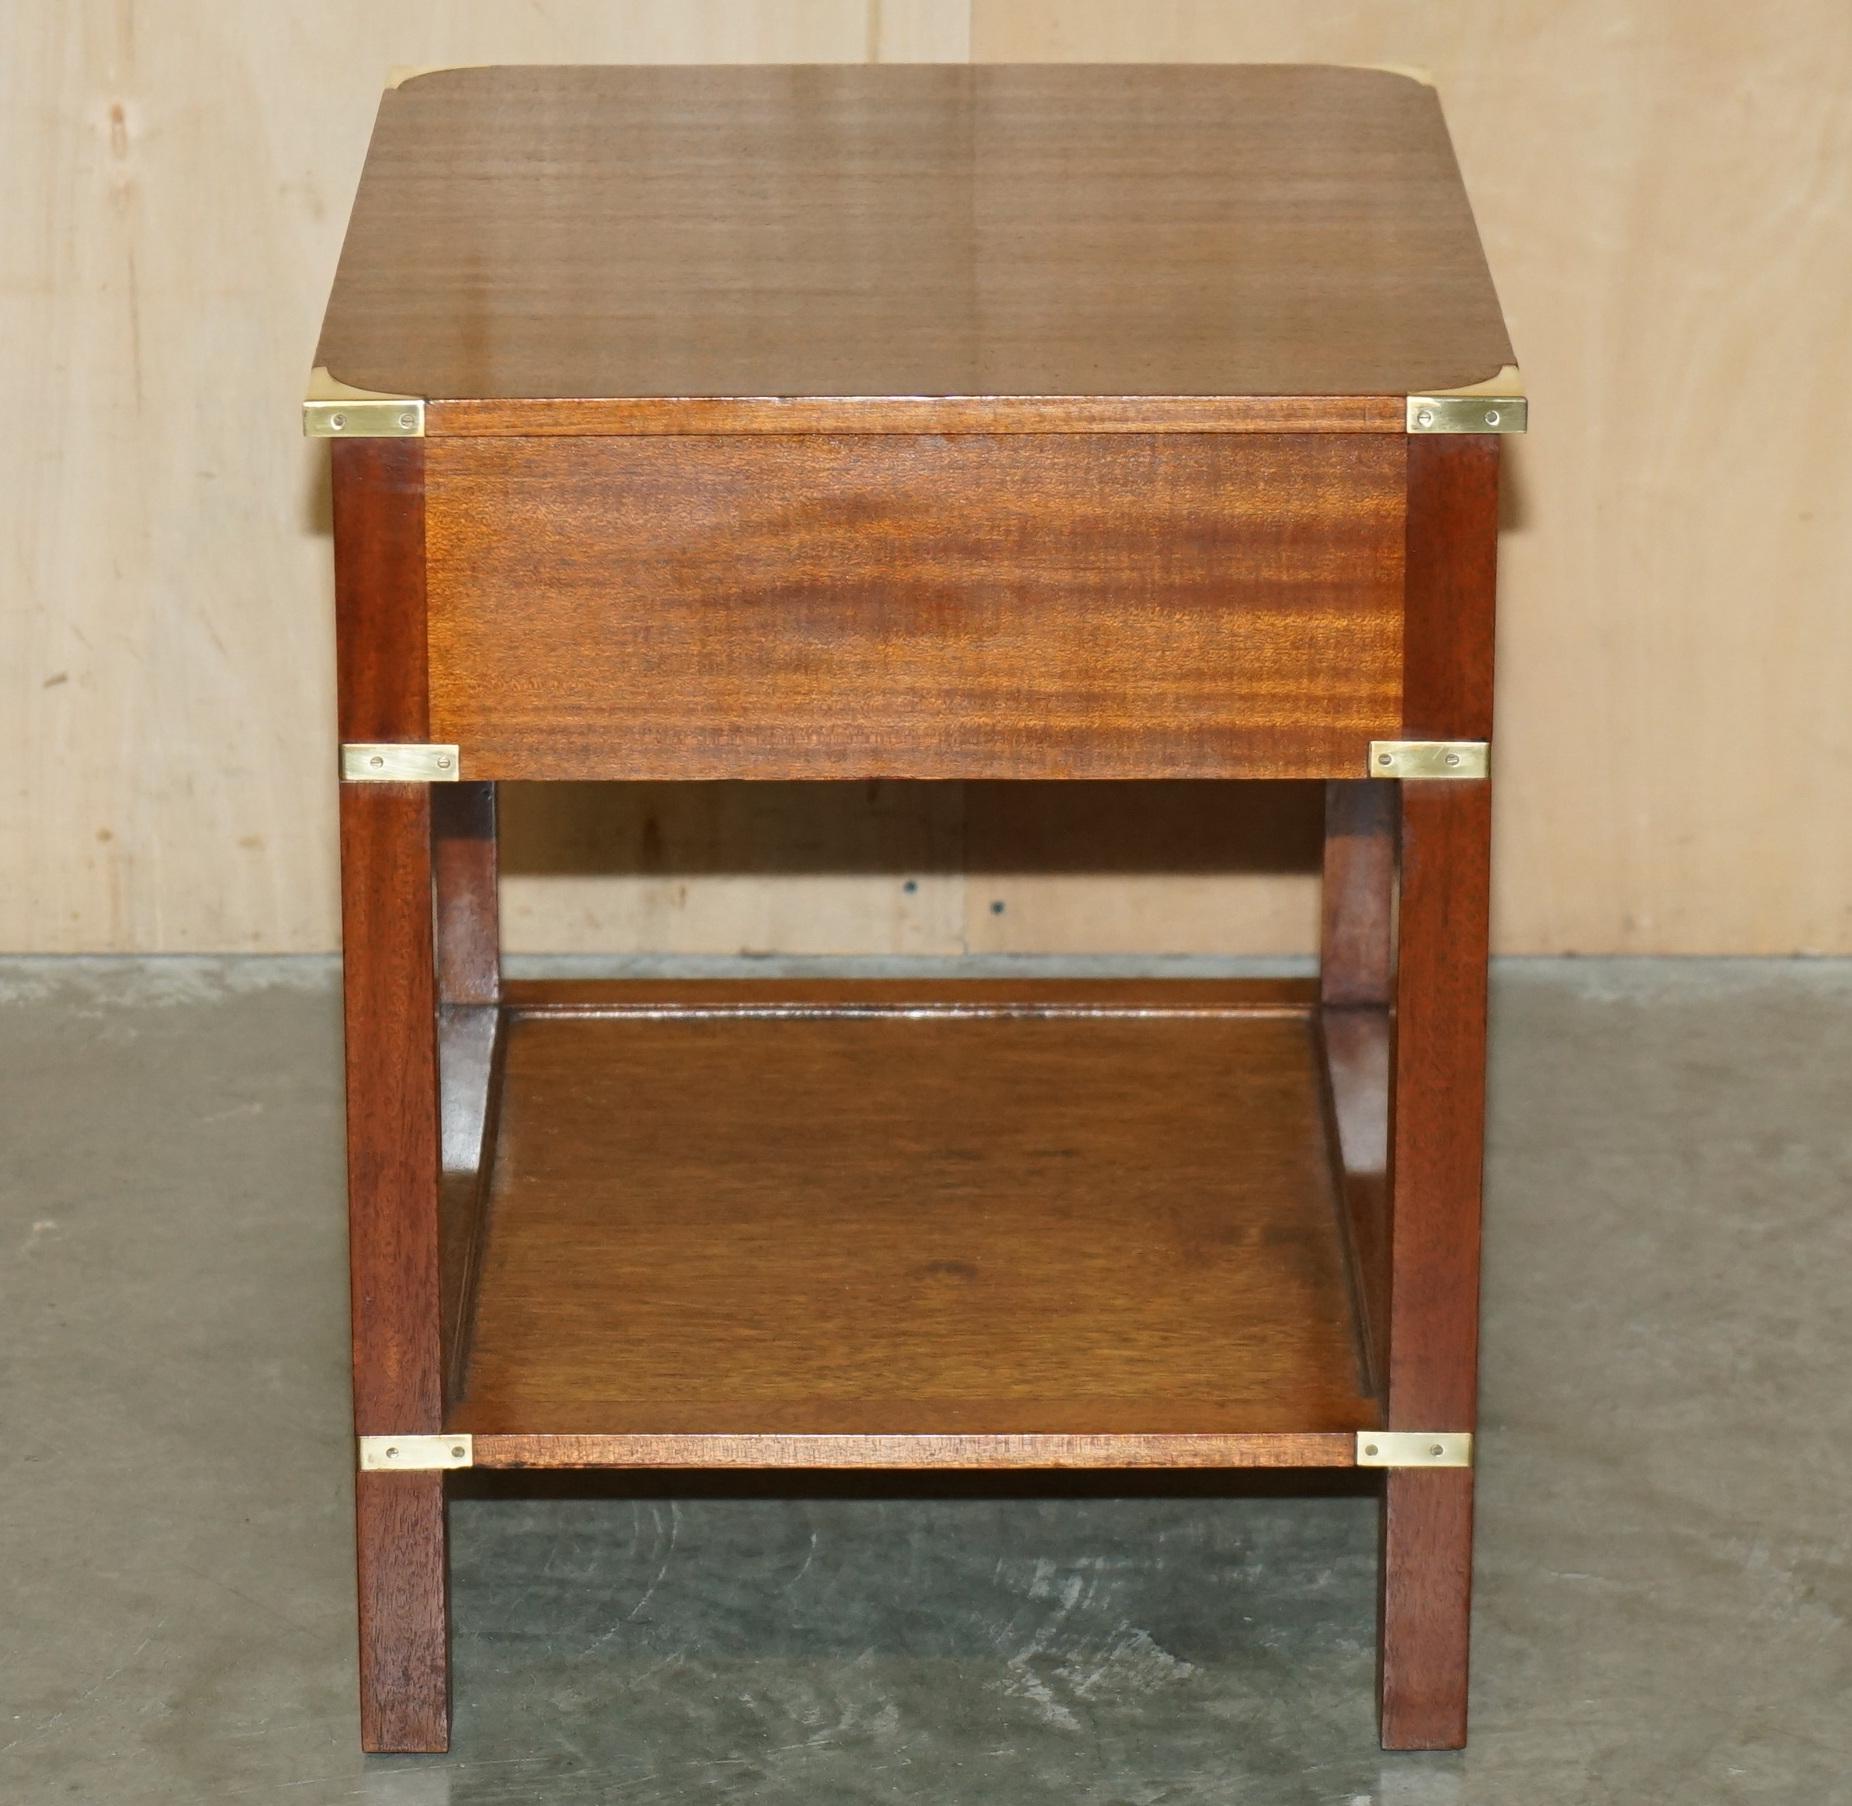 PAIR OF FULLY RESTORED HARRODS LONDON MiLITARY CAMPAIGN SINGLE DRAWER SIDE TABLE For Sale 5